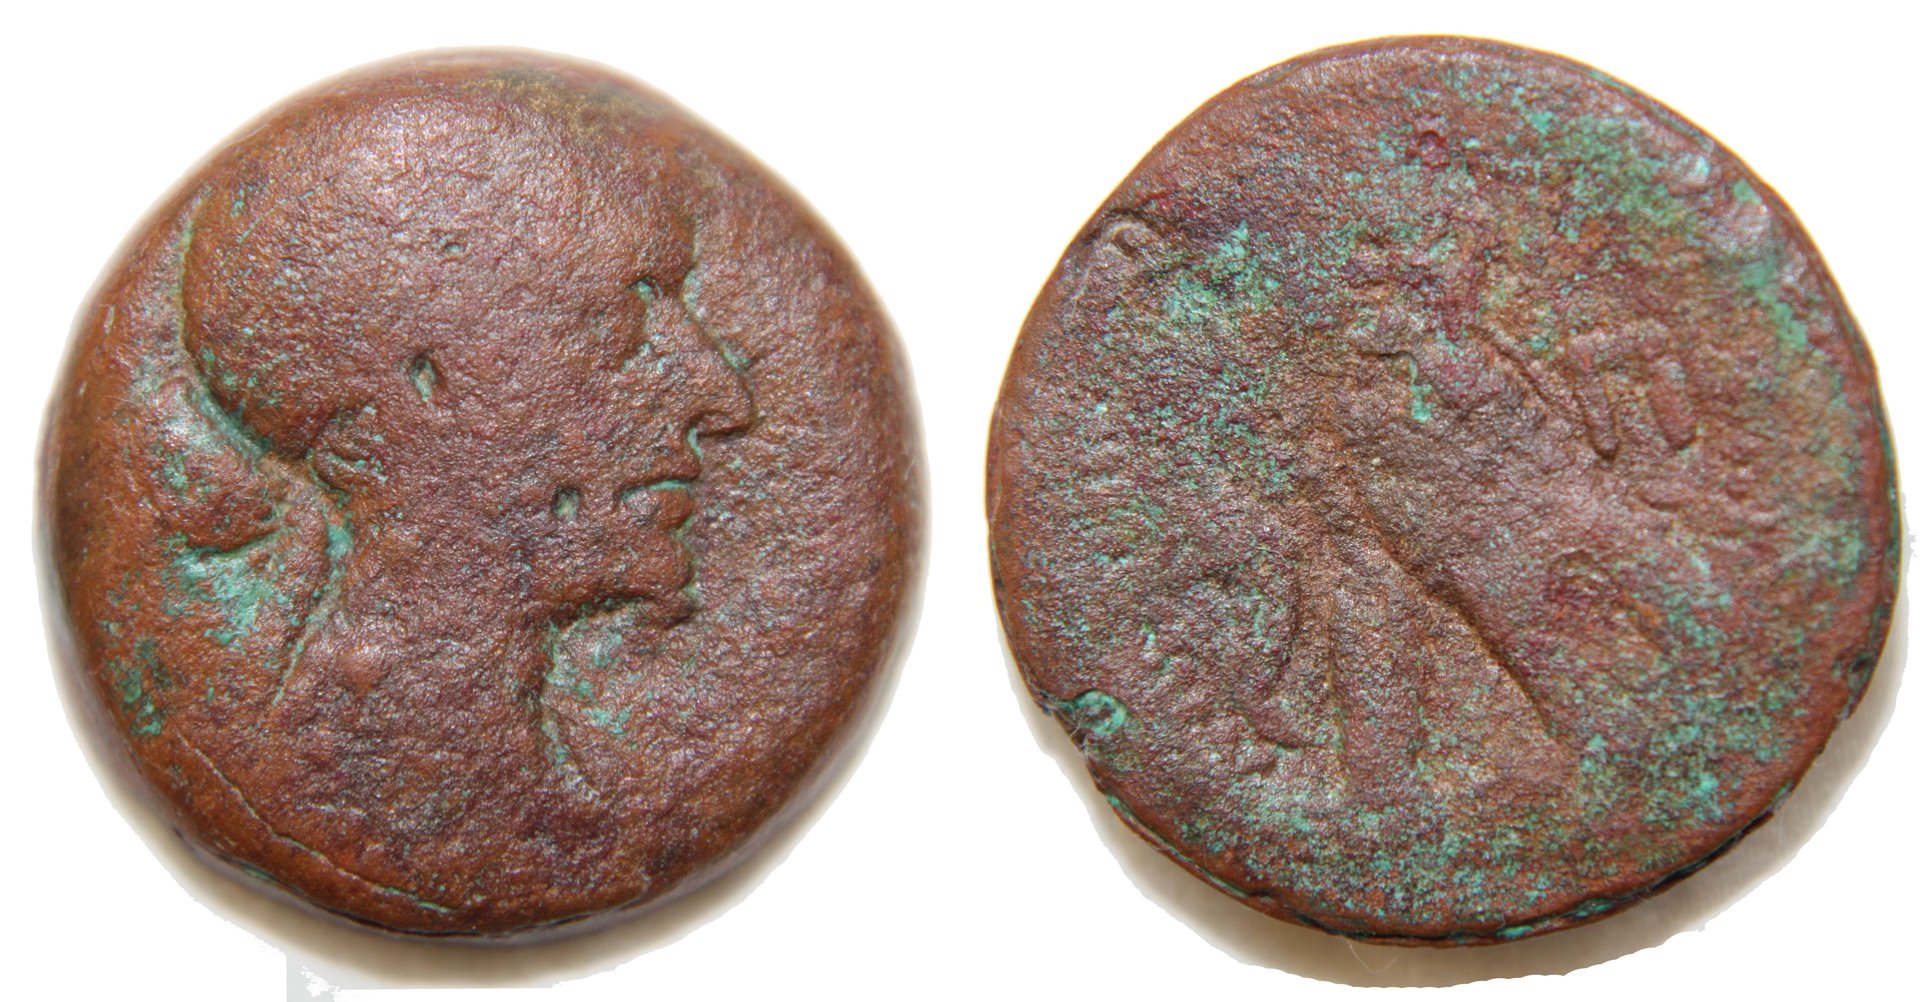 D-Camera Cleopatra VII, 80 Drachma, After cleaning and Renwax treatment, 7-2-20.jpg